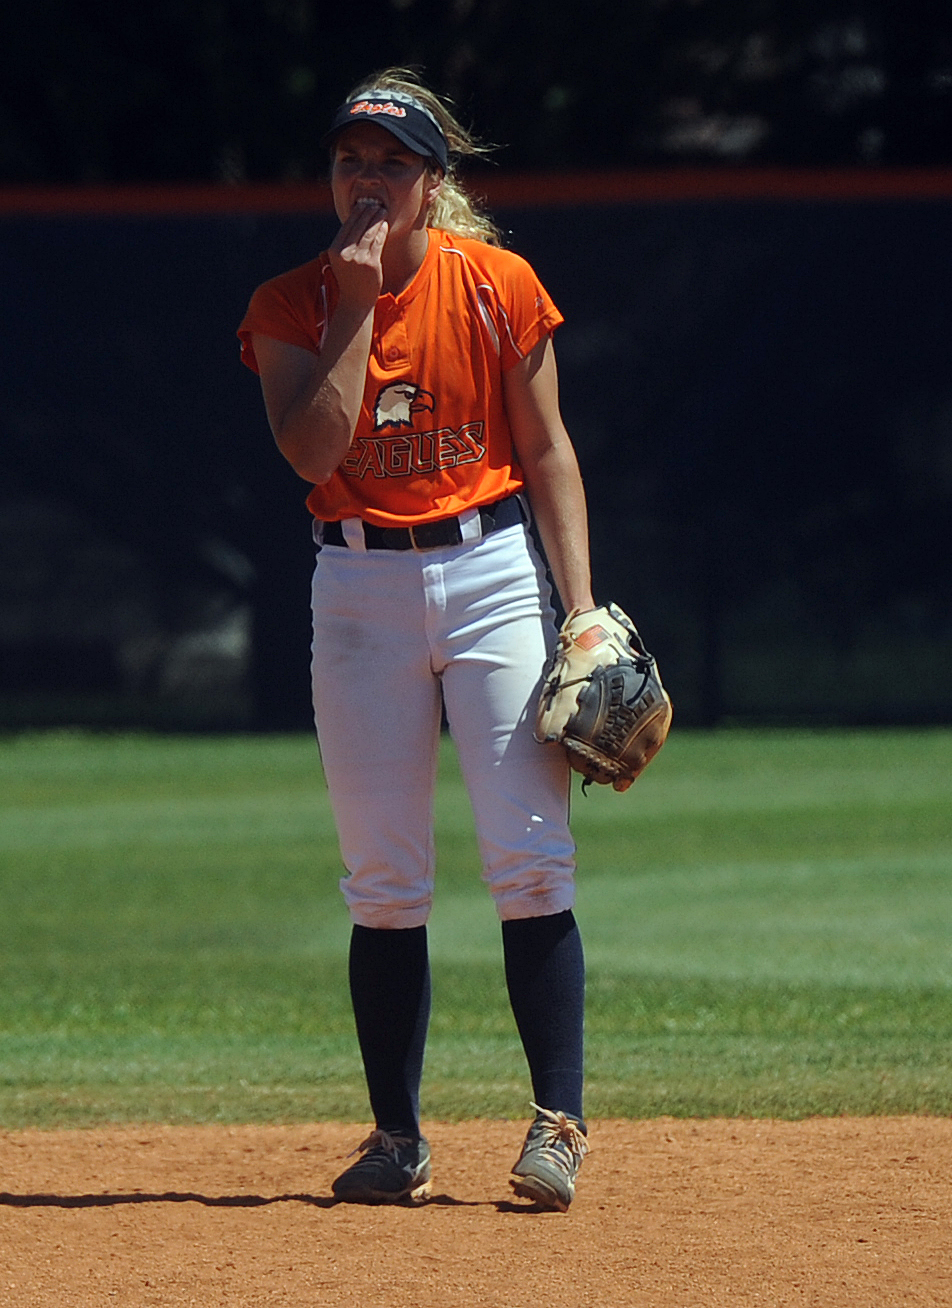 One month remains to register for Carson-Newman Softball Instruction Camp